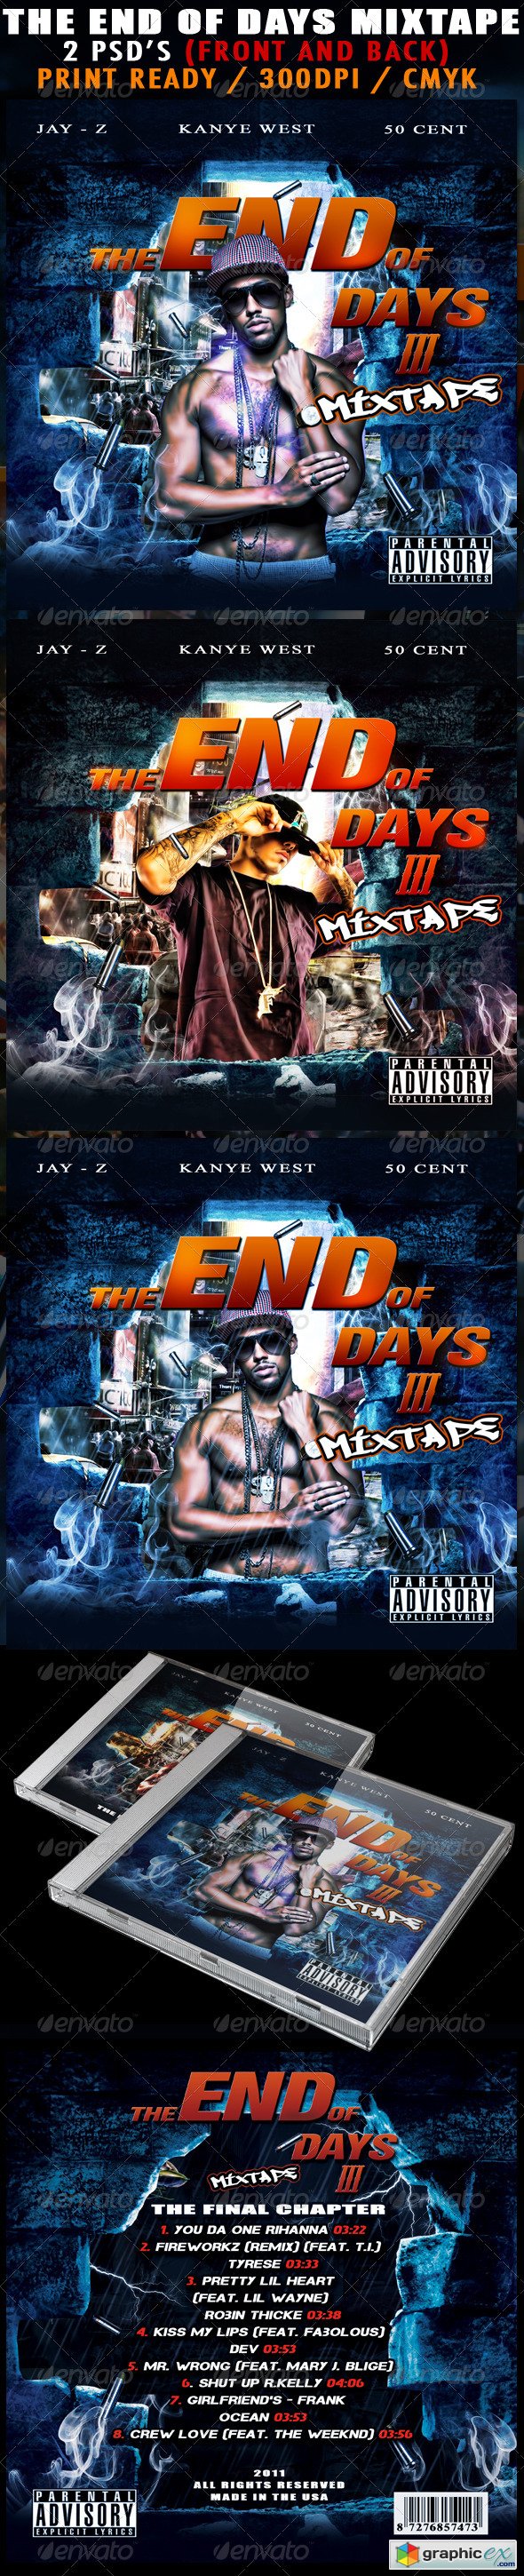 The End Of Days 3 Mixtape Cover